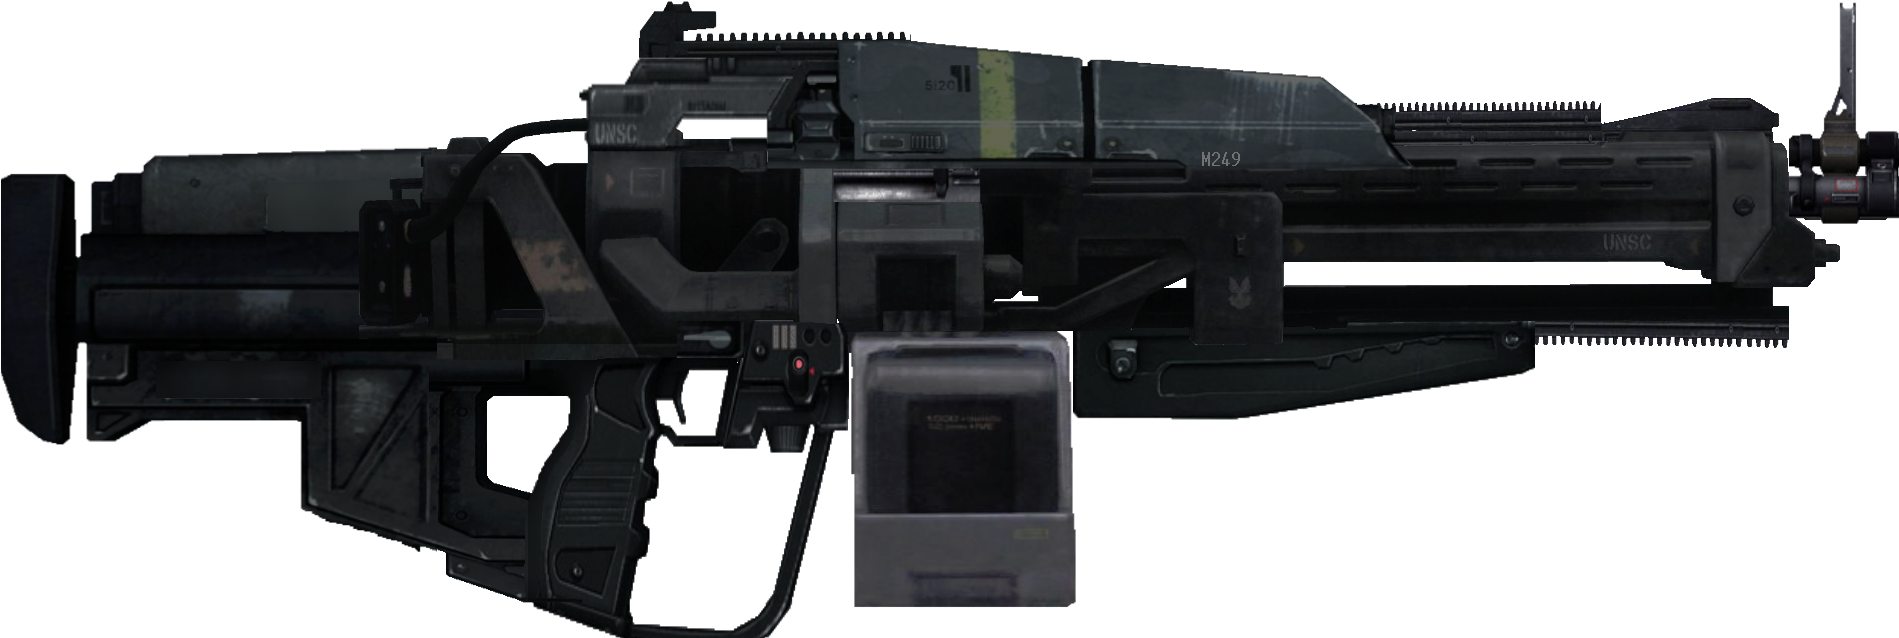 M249 Saw - Halo 5 Saw (1920x790), Png Download